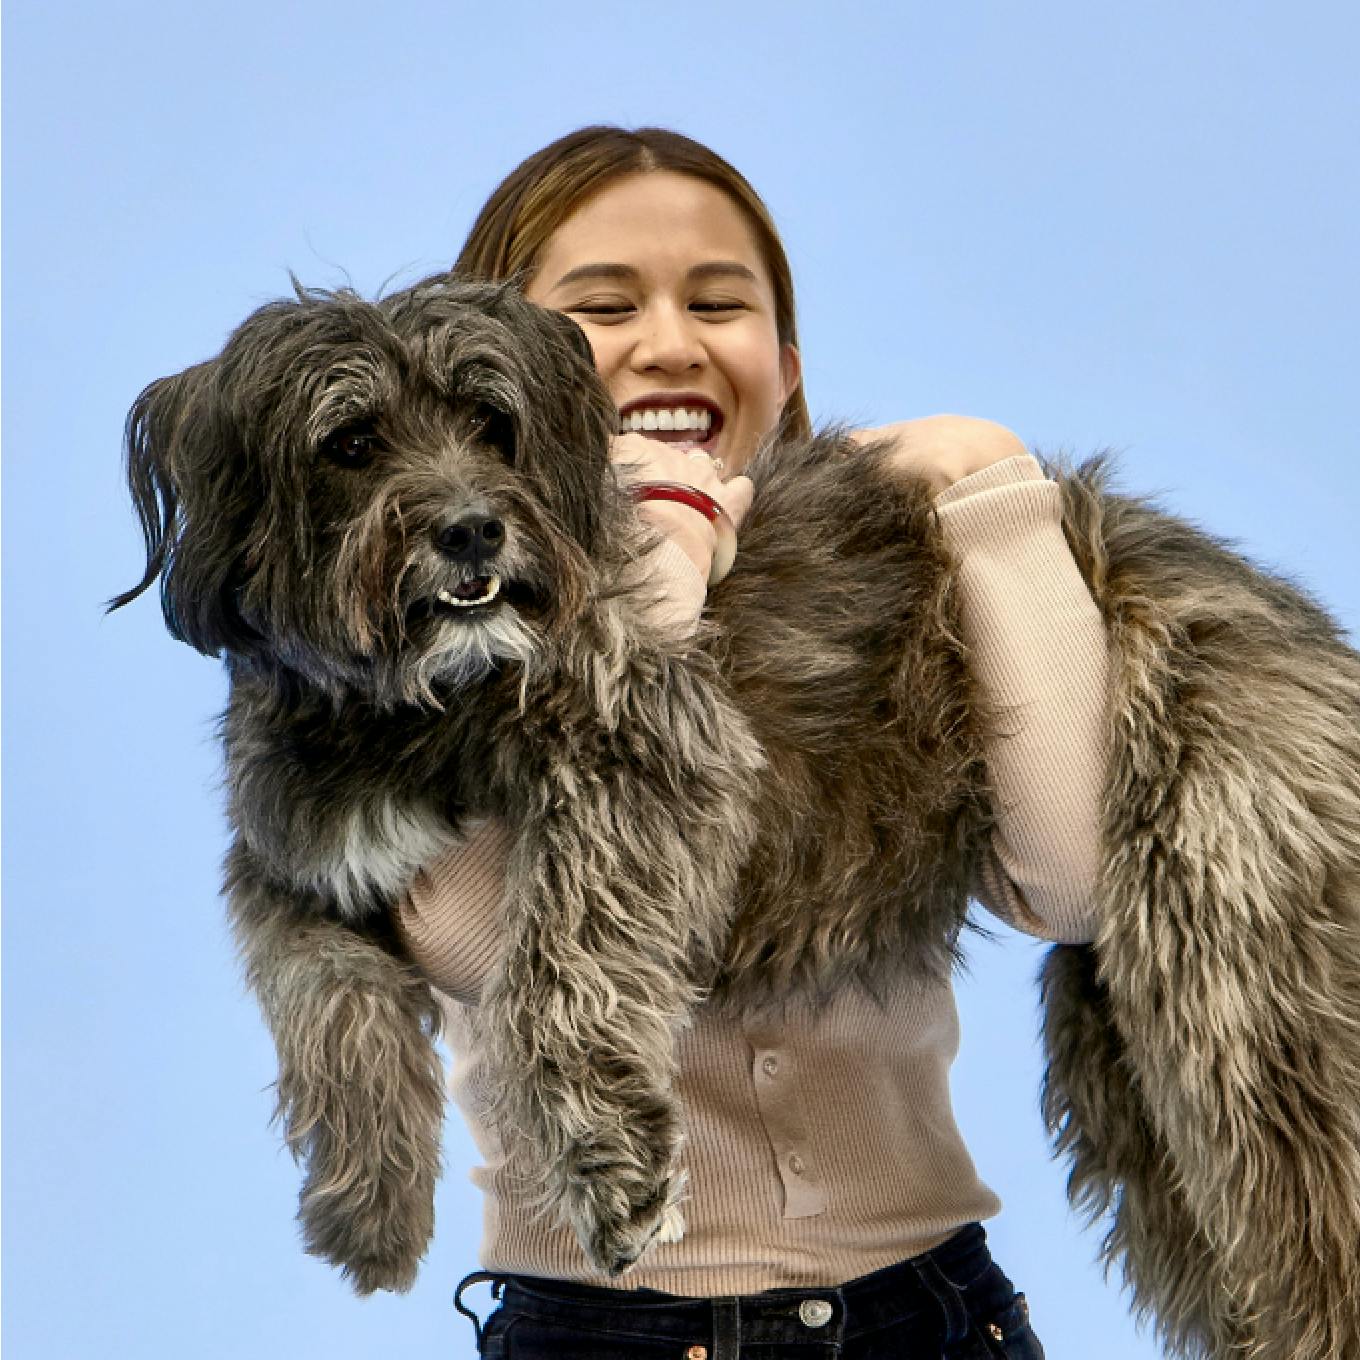 Laughing woman carrying a dog in her arms